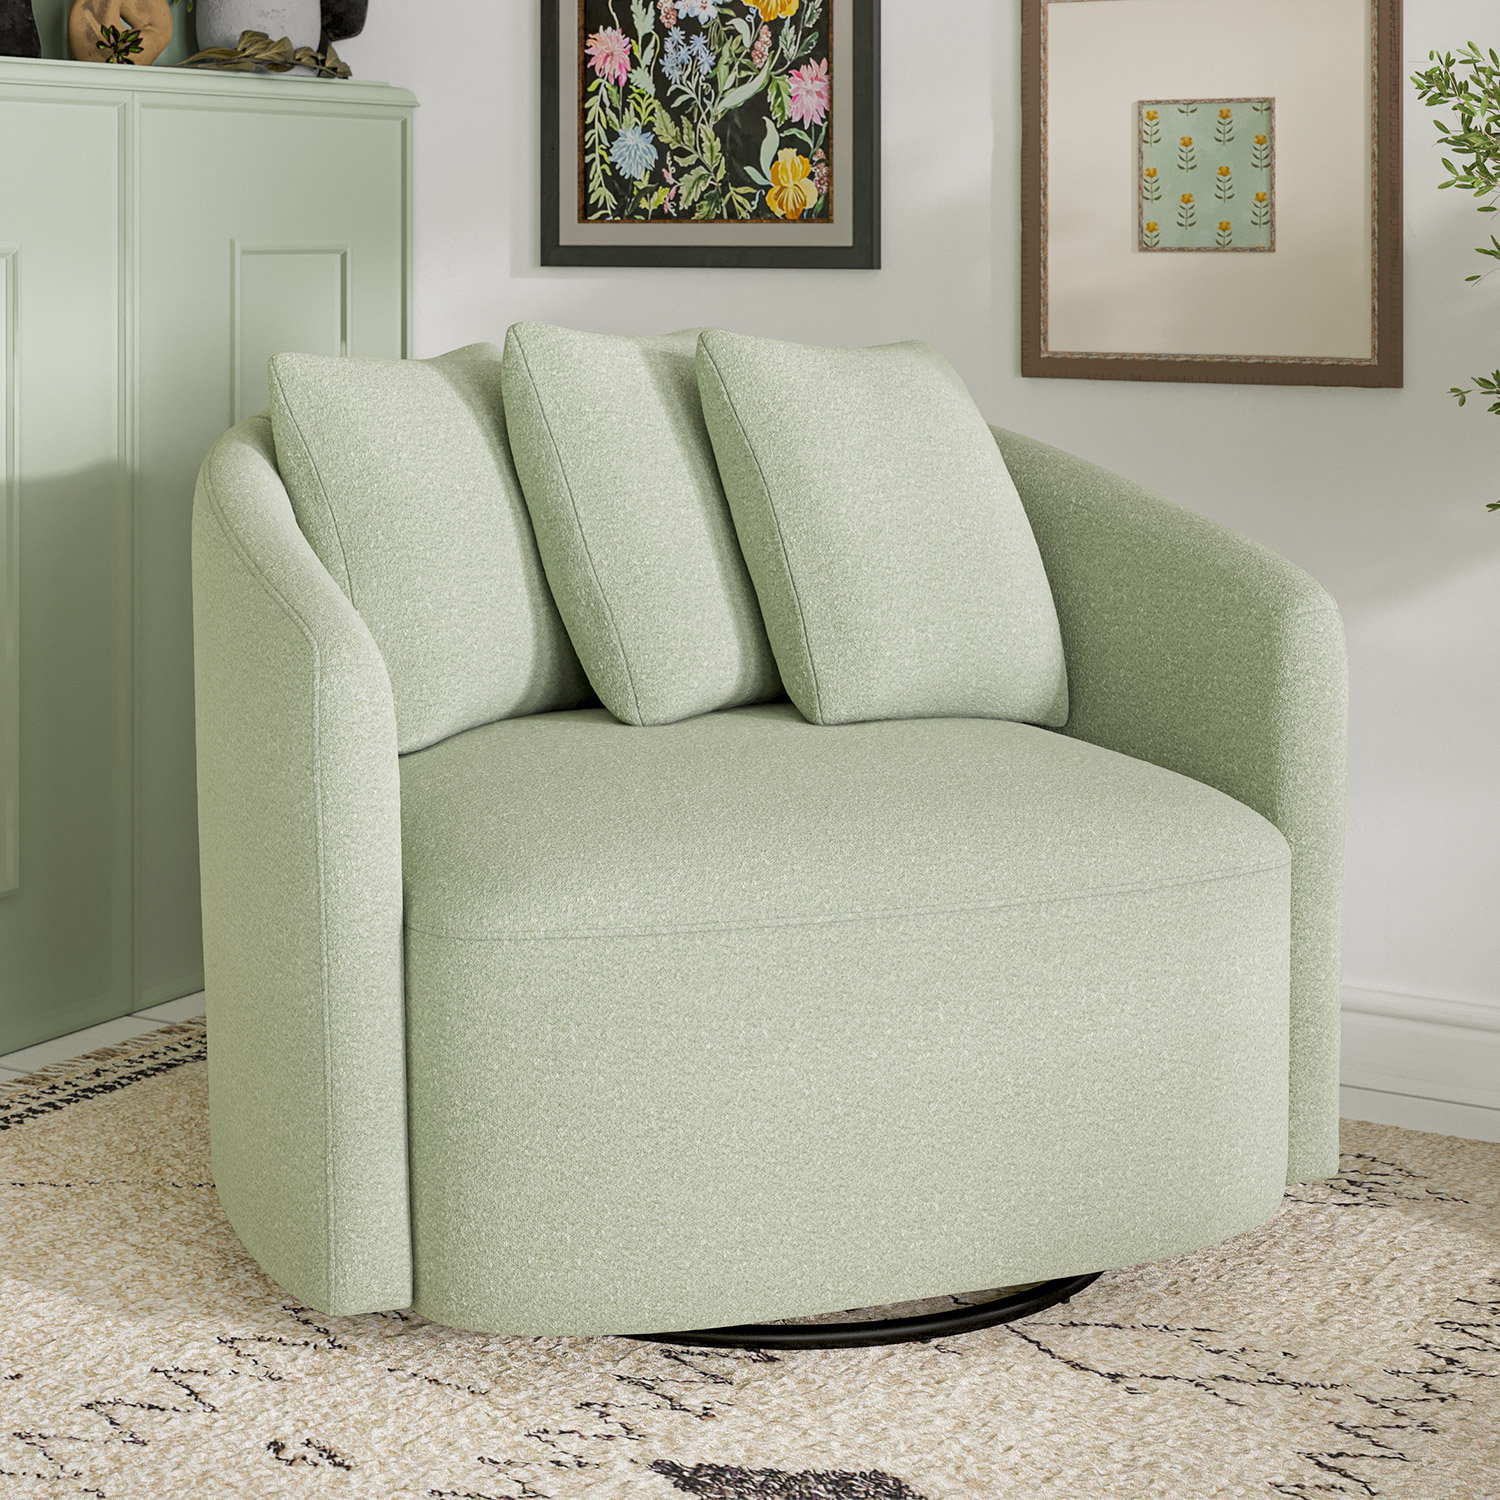 Beautiful Drew Chair by Drew Barrymore, Sage - image 1 of 8